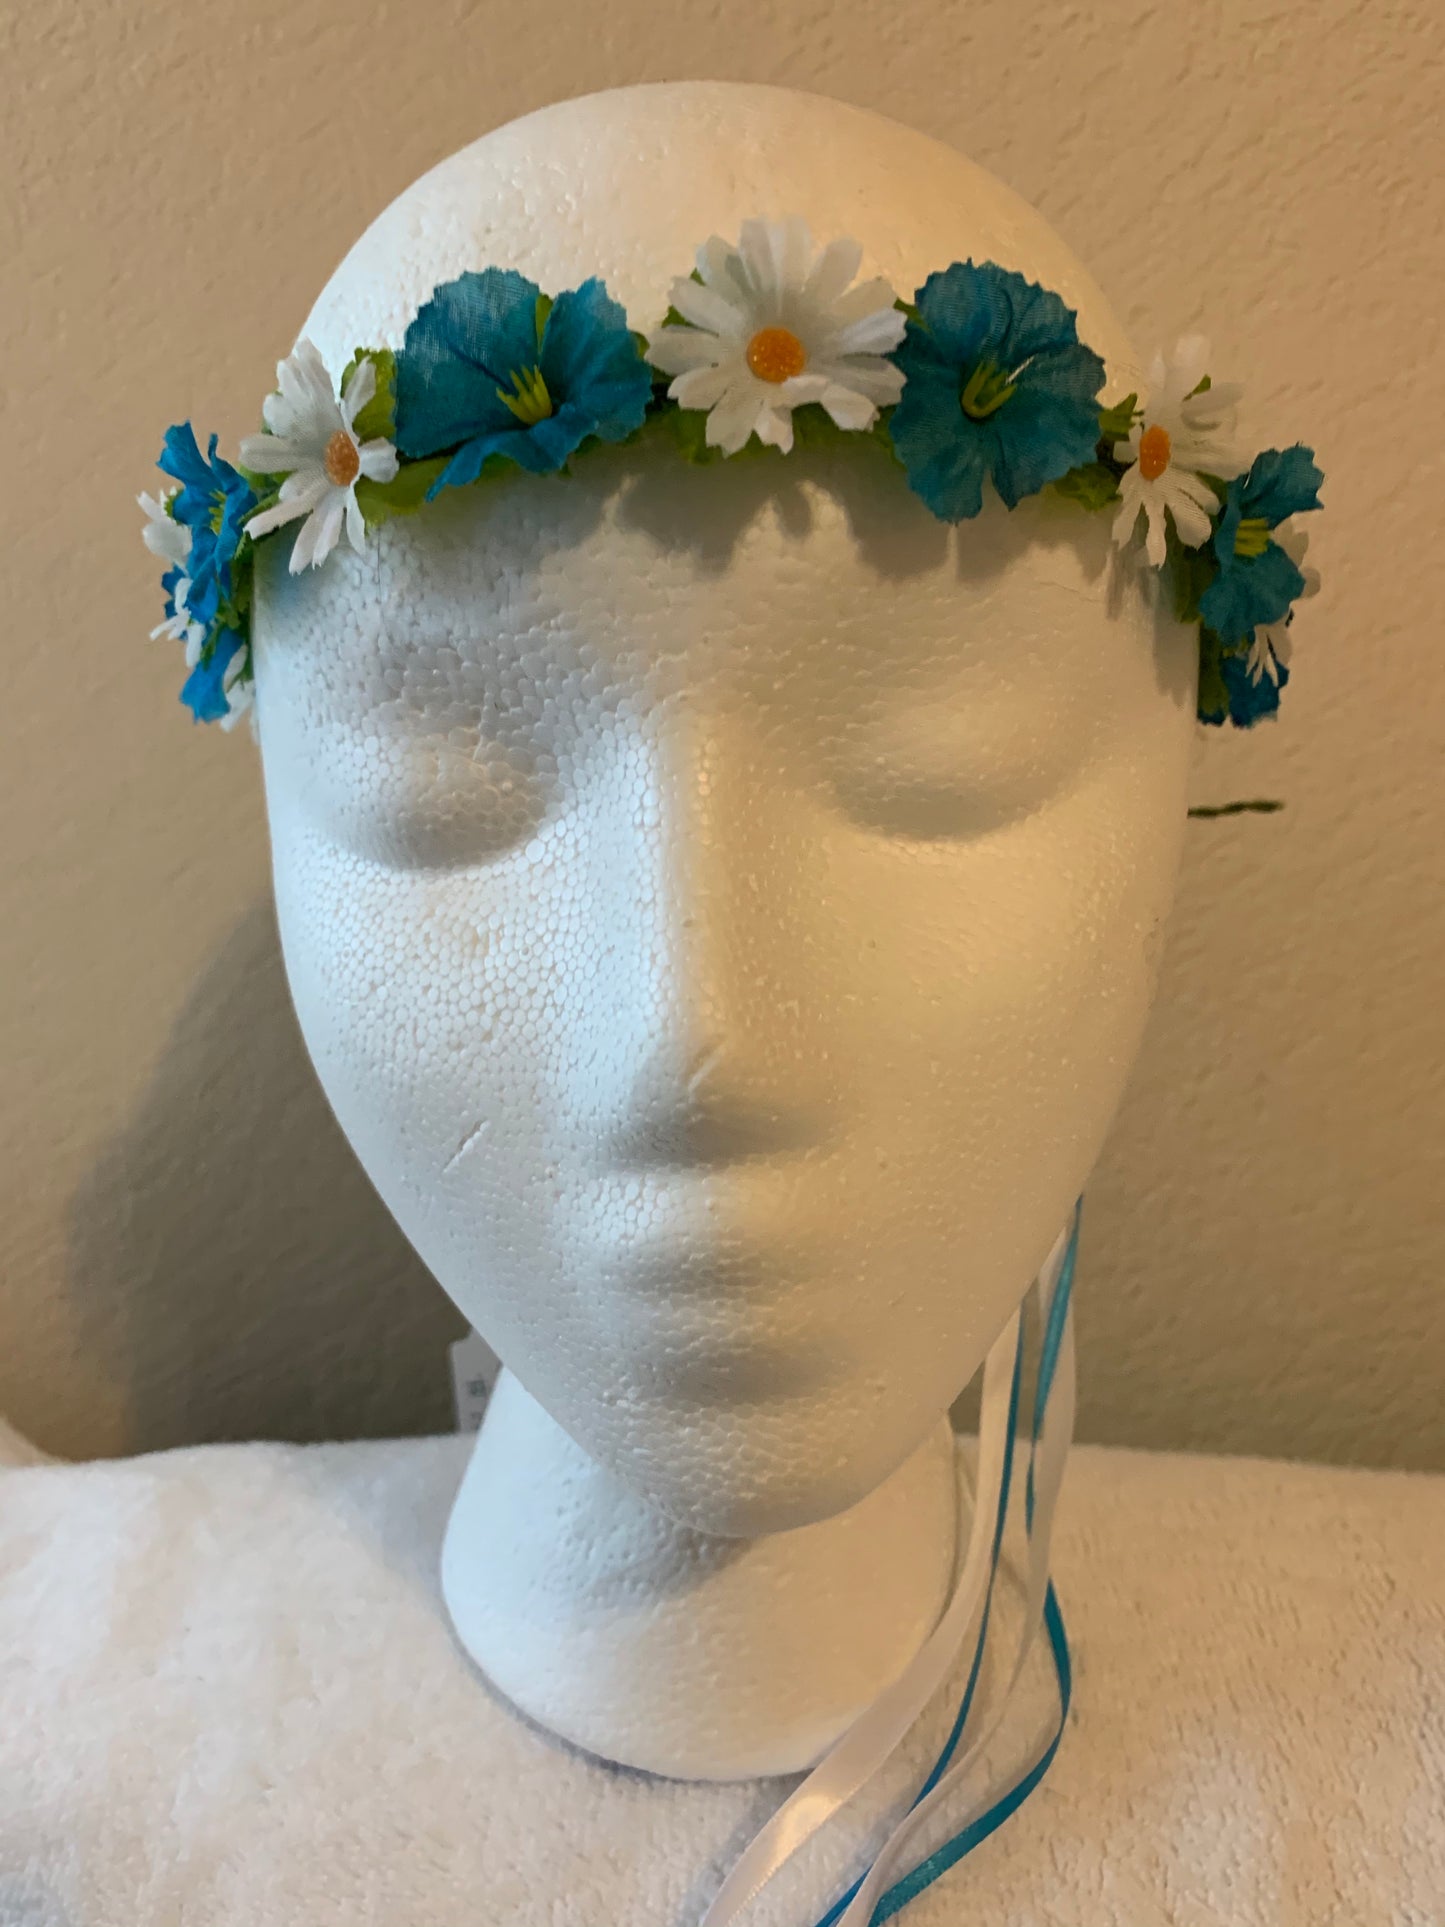 Extra Small Wreath - Teal and White Daisies